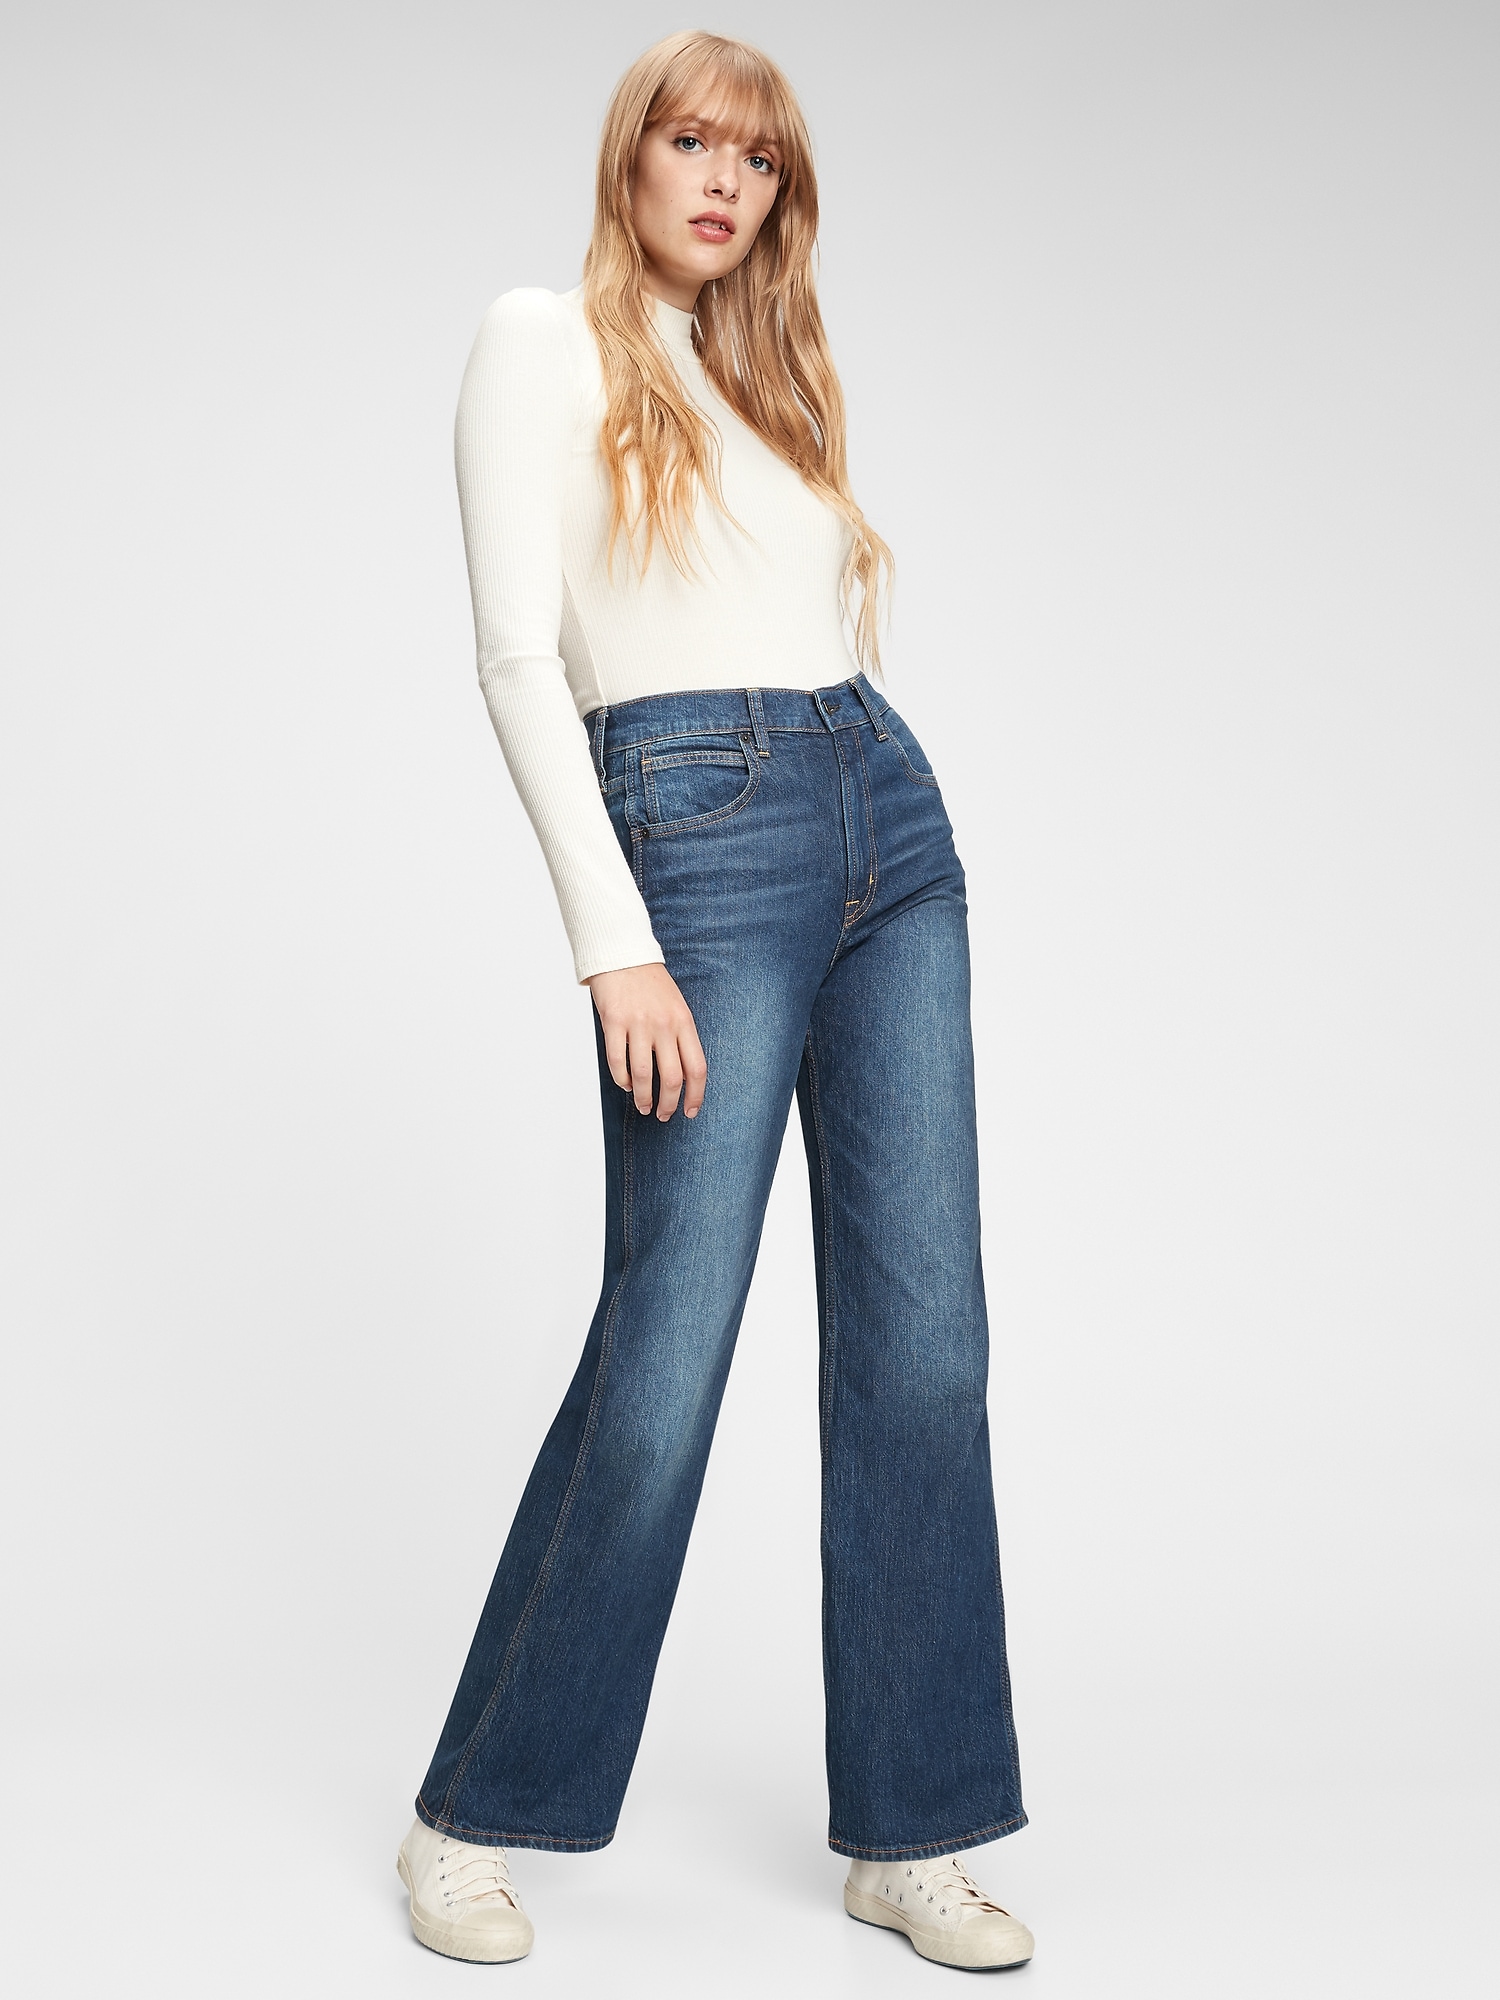 vintage high waisted flare jeans